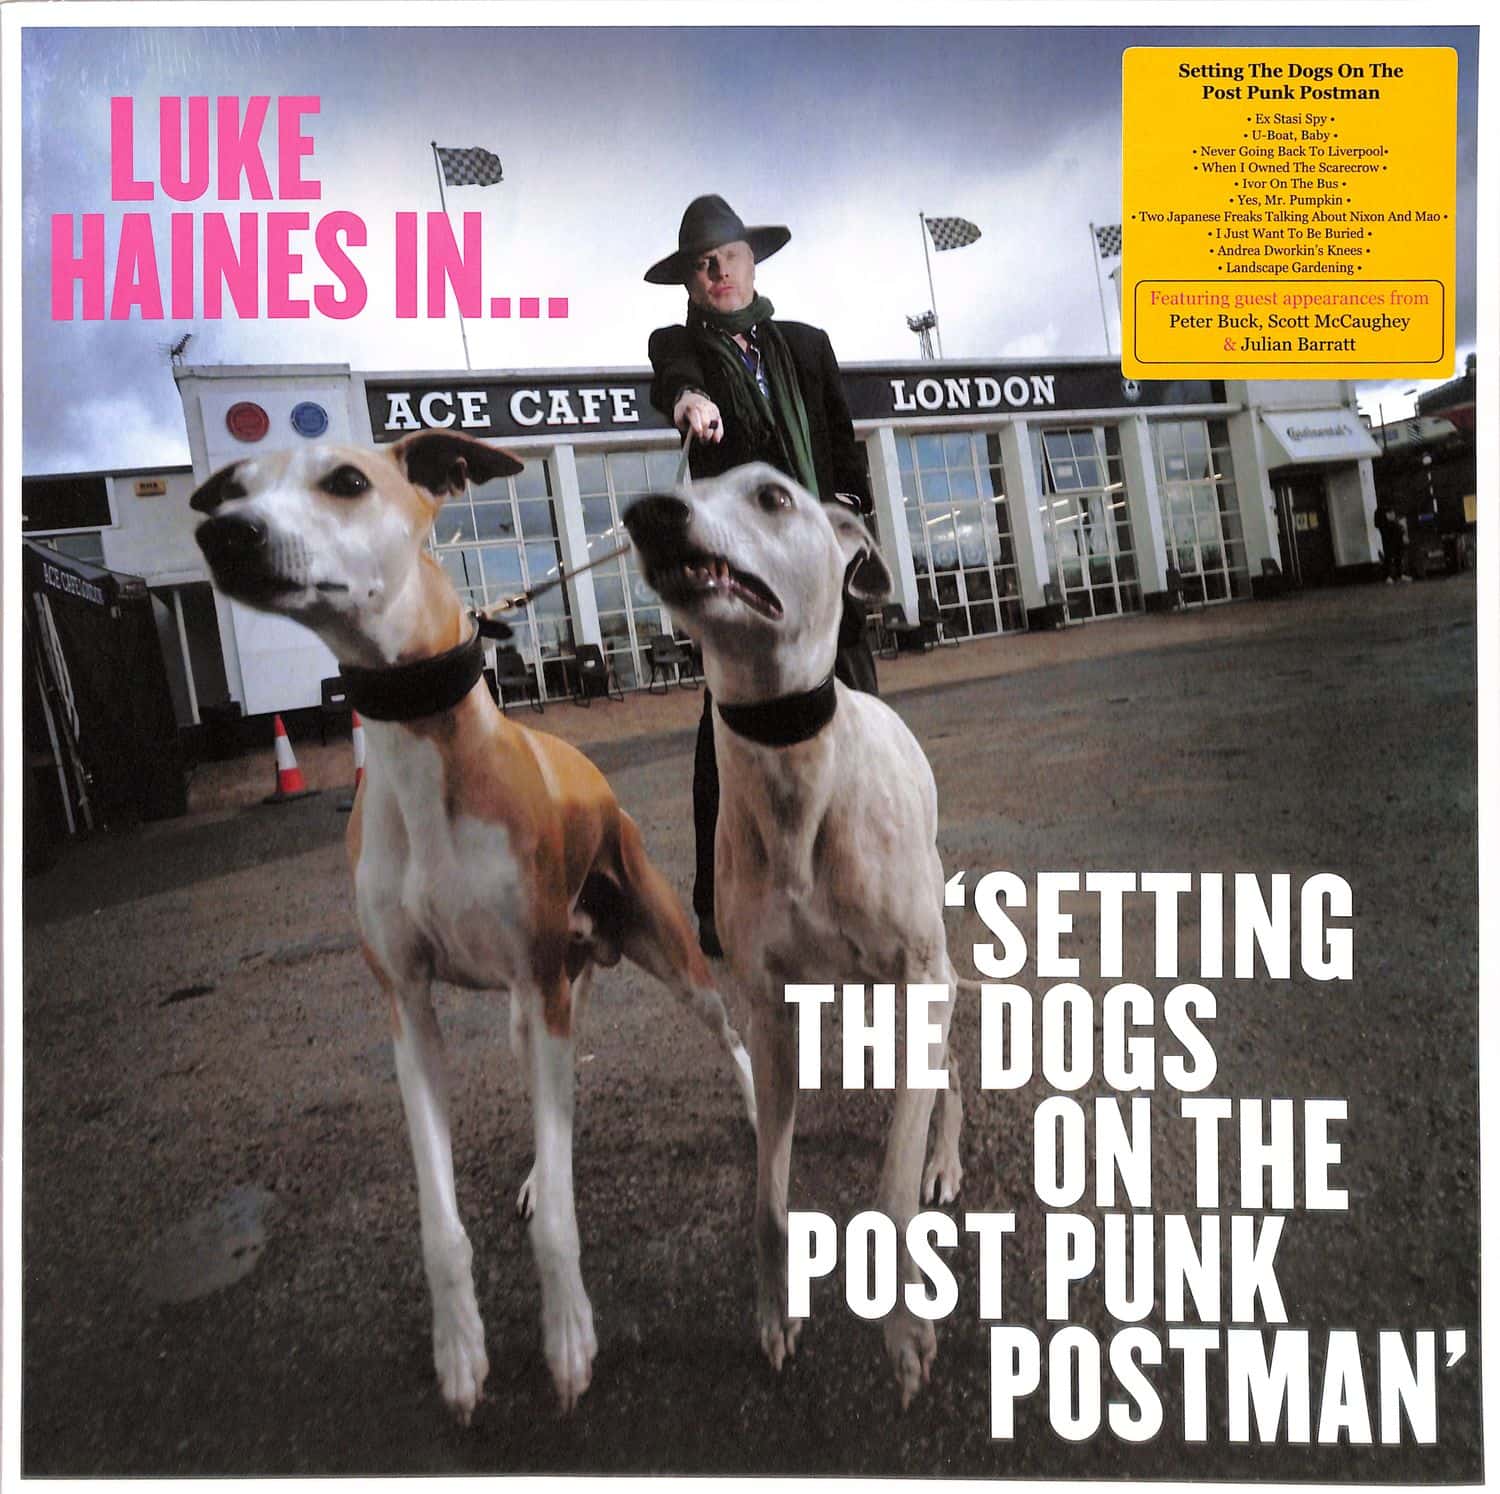 Luke Haines - LUKE HAINES IN...SETTING THE DOGS ON THE POST PUNK 